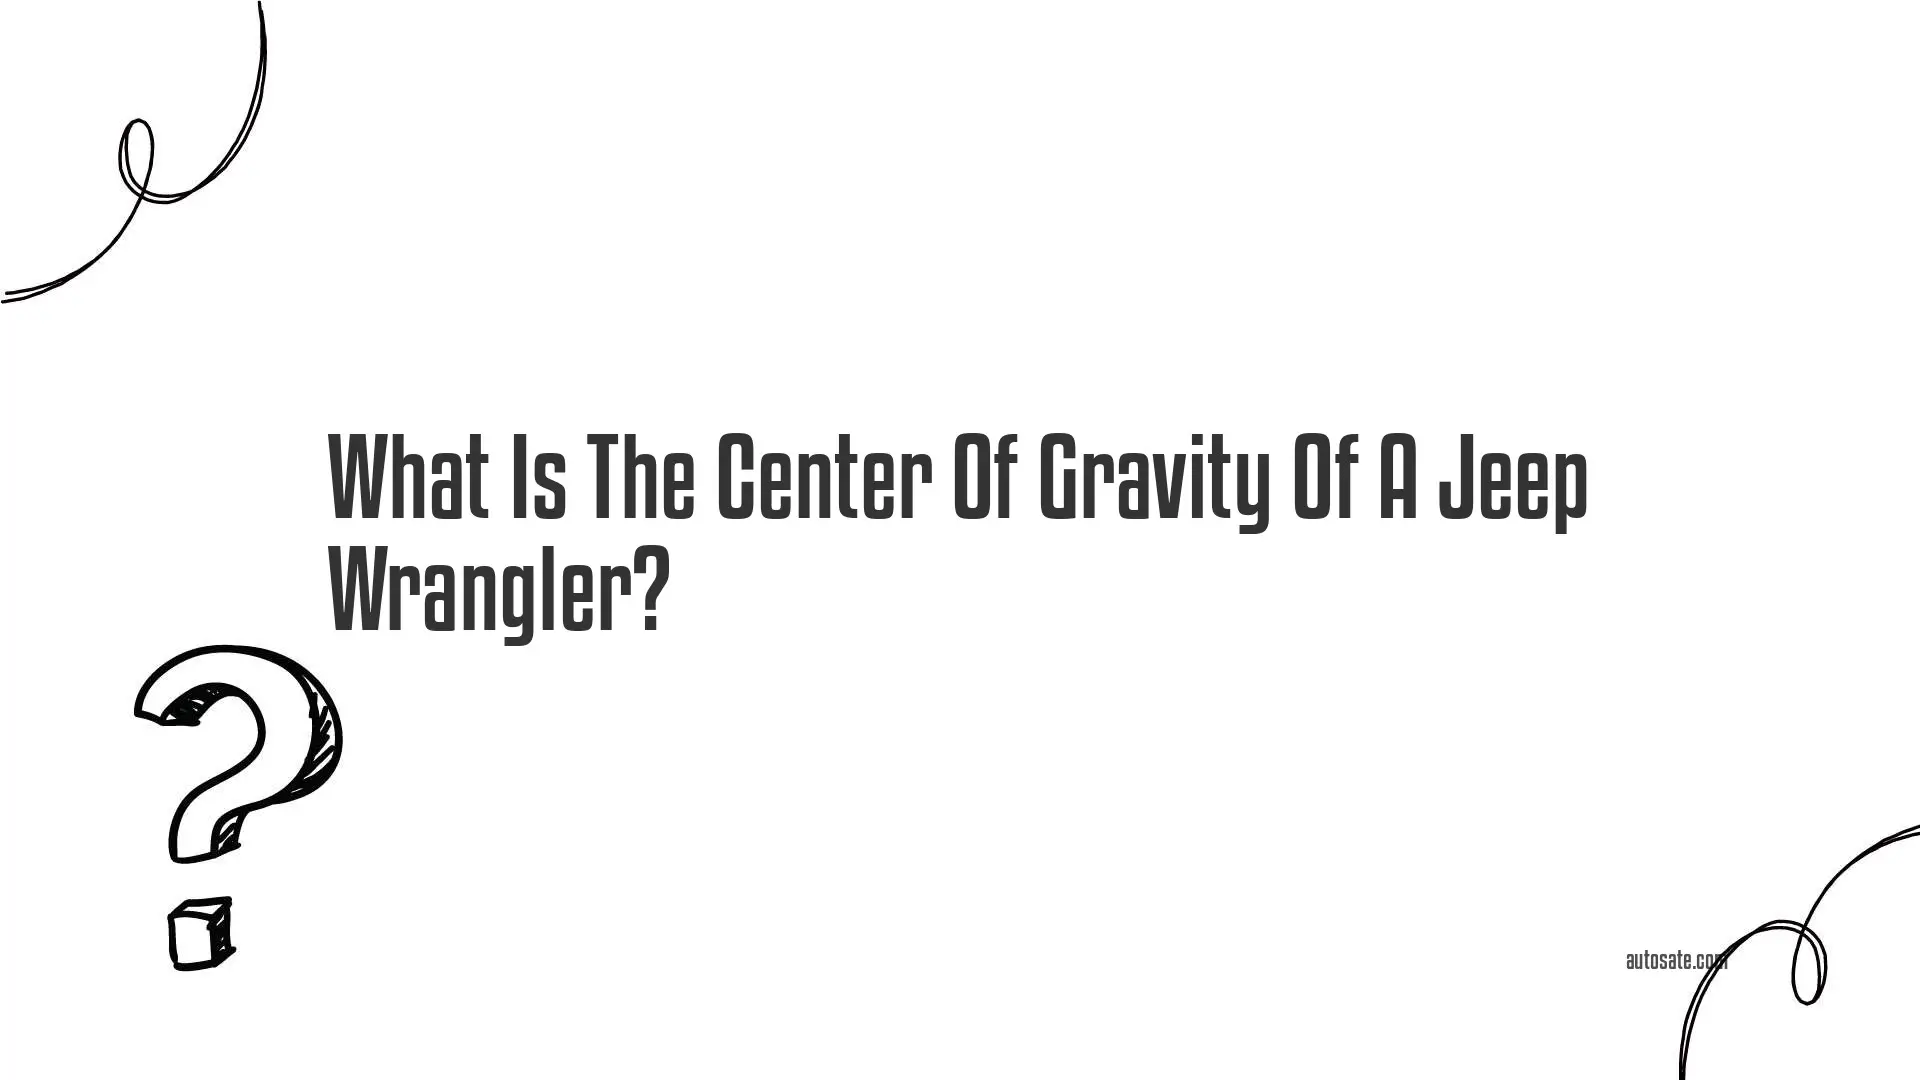 What Is The Center Of Gravity Of A Jeep Wrangler?